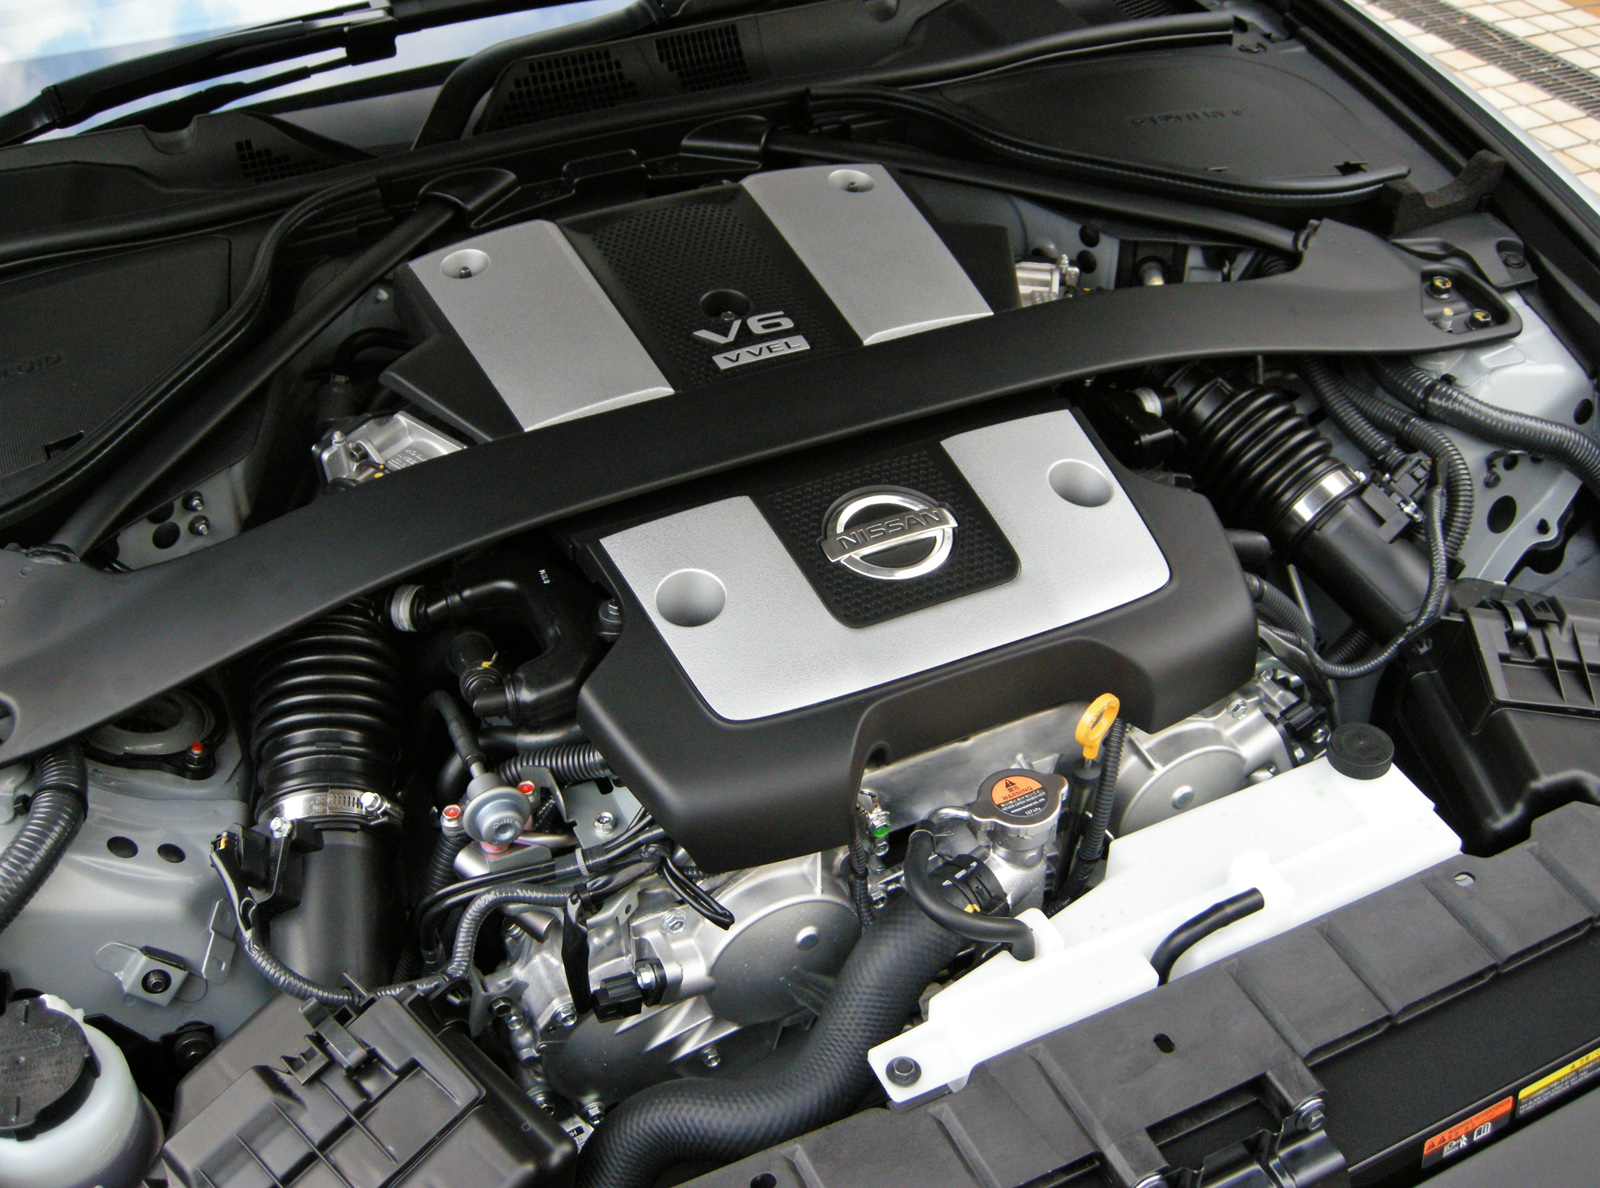 Nissan vq engines for sale #5